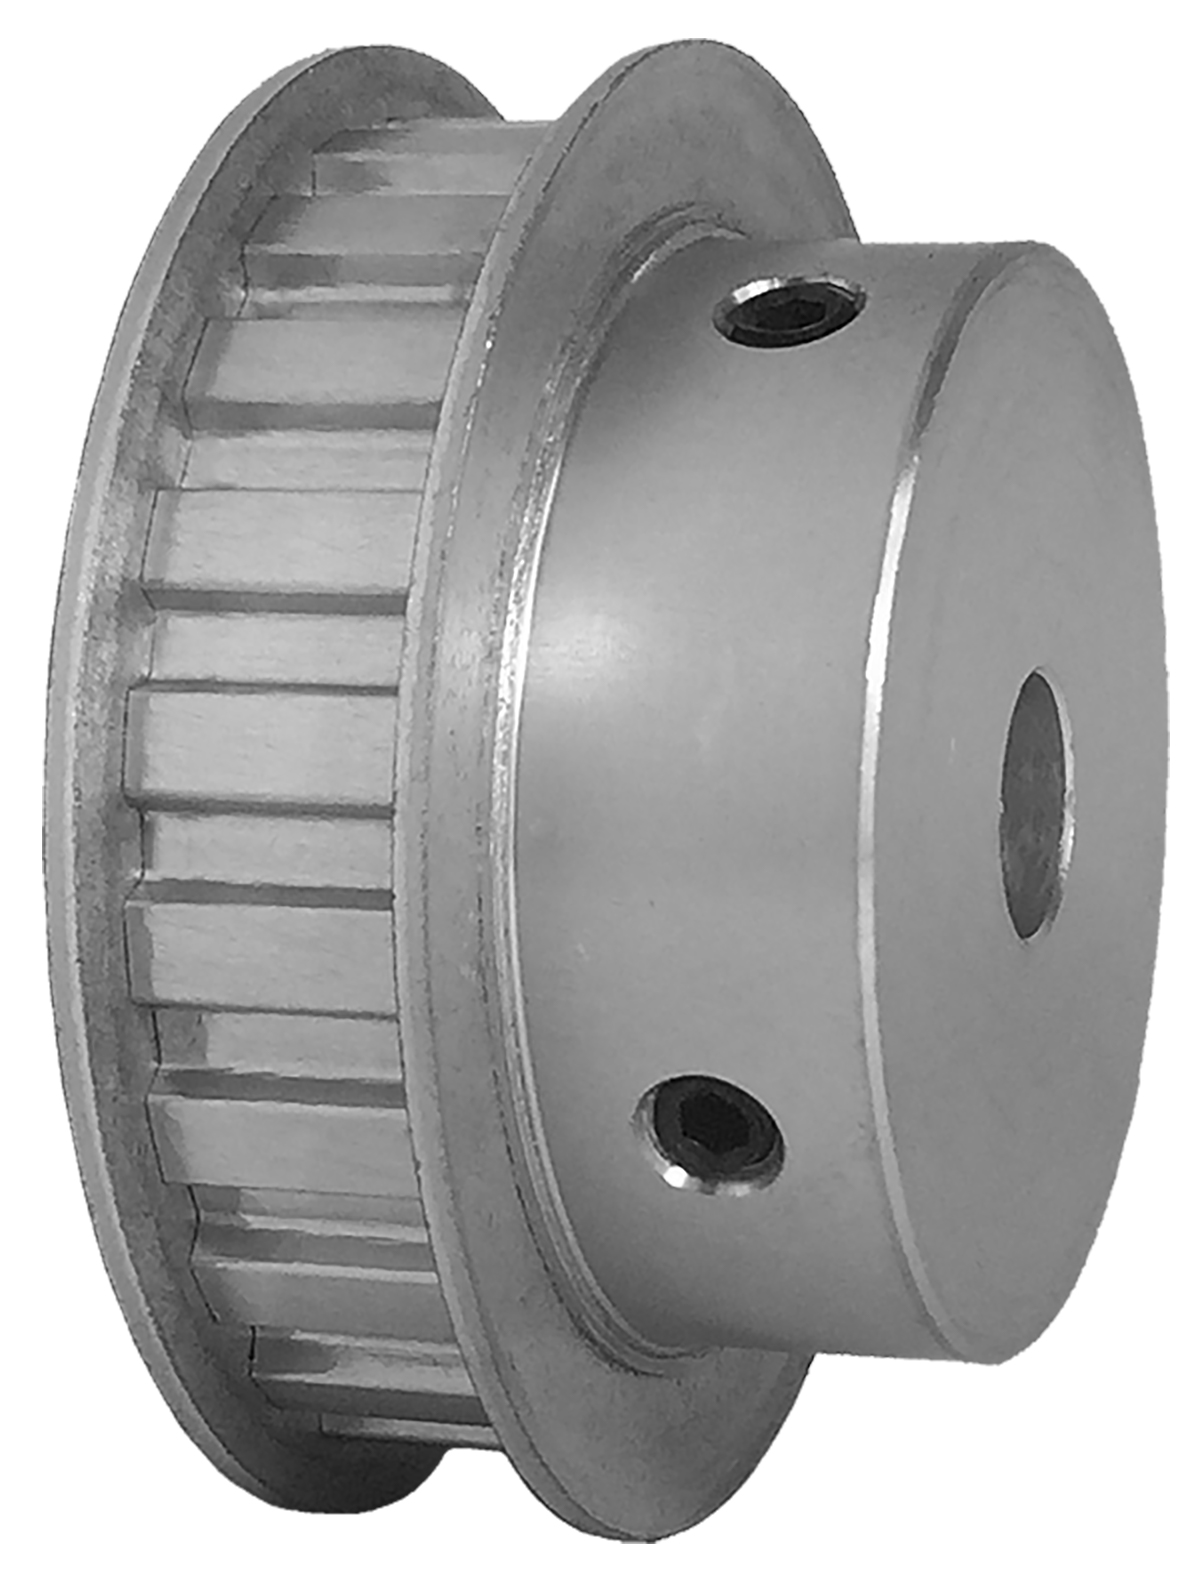 22L050-6FA6 - Aluminum Imperial Pitch Pulleys